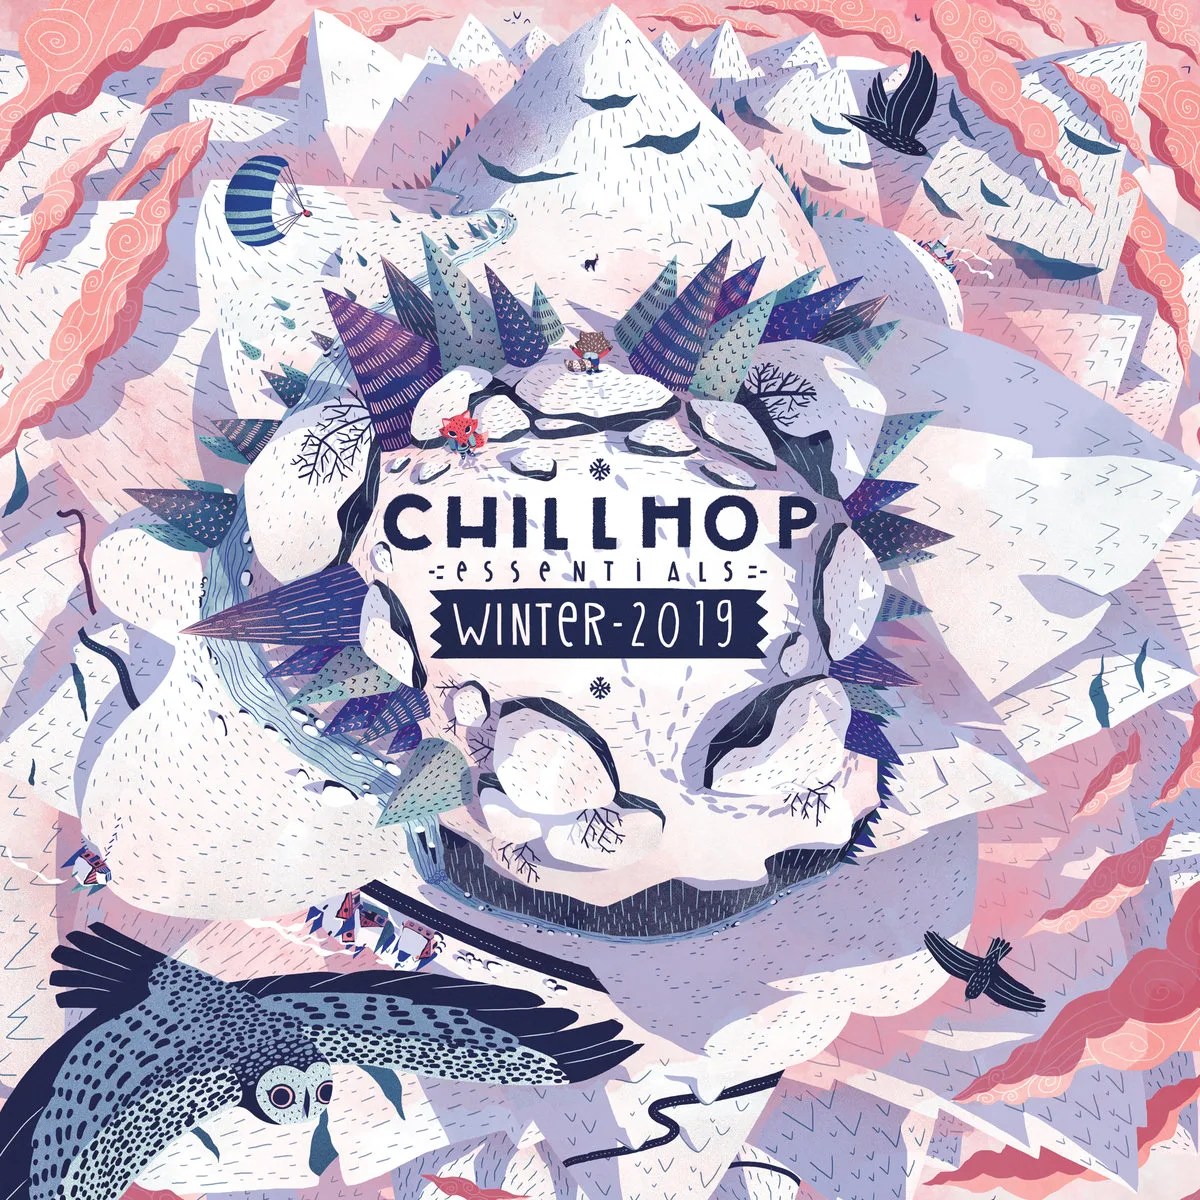 Surrounded by steady snowfall, seeking warmth in cozy coats, Winter Essentials brings this decade to a close with chilled bliss. Featuring a rundown of 24 relaxed and vibrant instrumentals, our final compilation of 2019 is the carefully curated release you've been waiting for to soundtrack this season. Let it lovingly guide you through the ice and frost warmly into next year, where anything is possible.